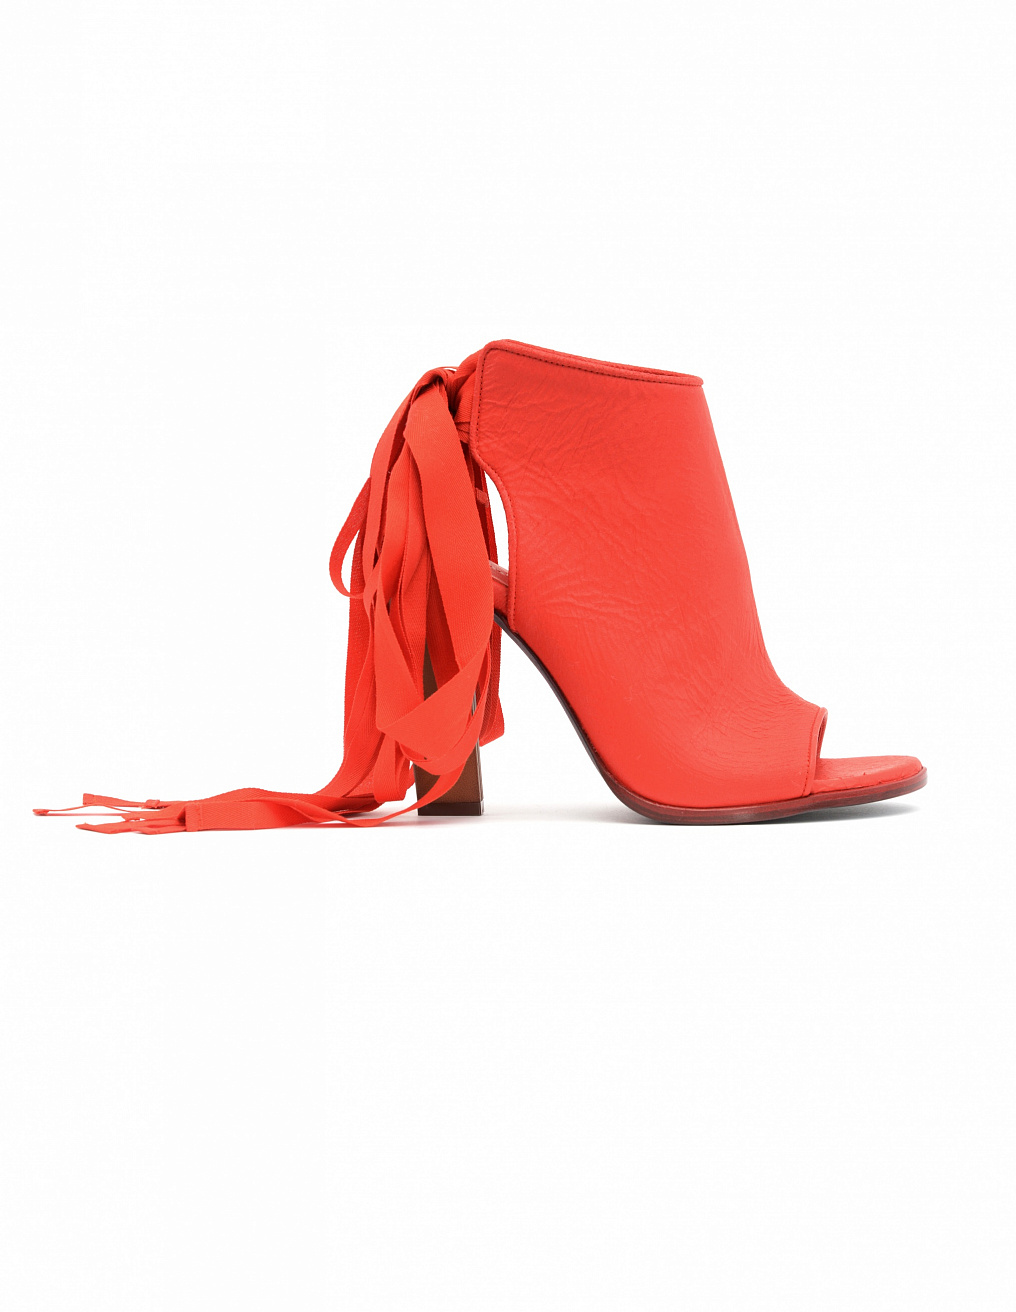 A.f.vandevorst RED LEATHER OPEN-TOE ANKLE BOOTS